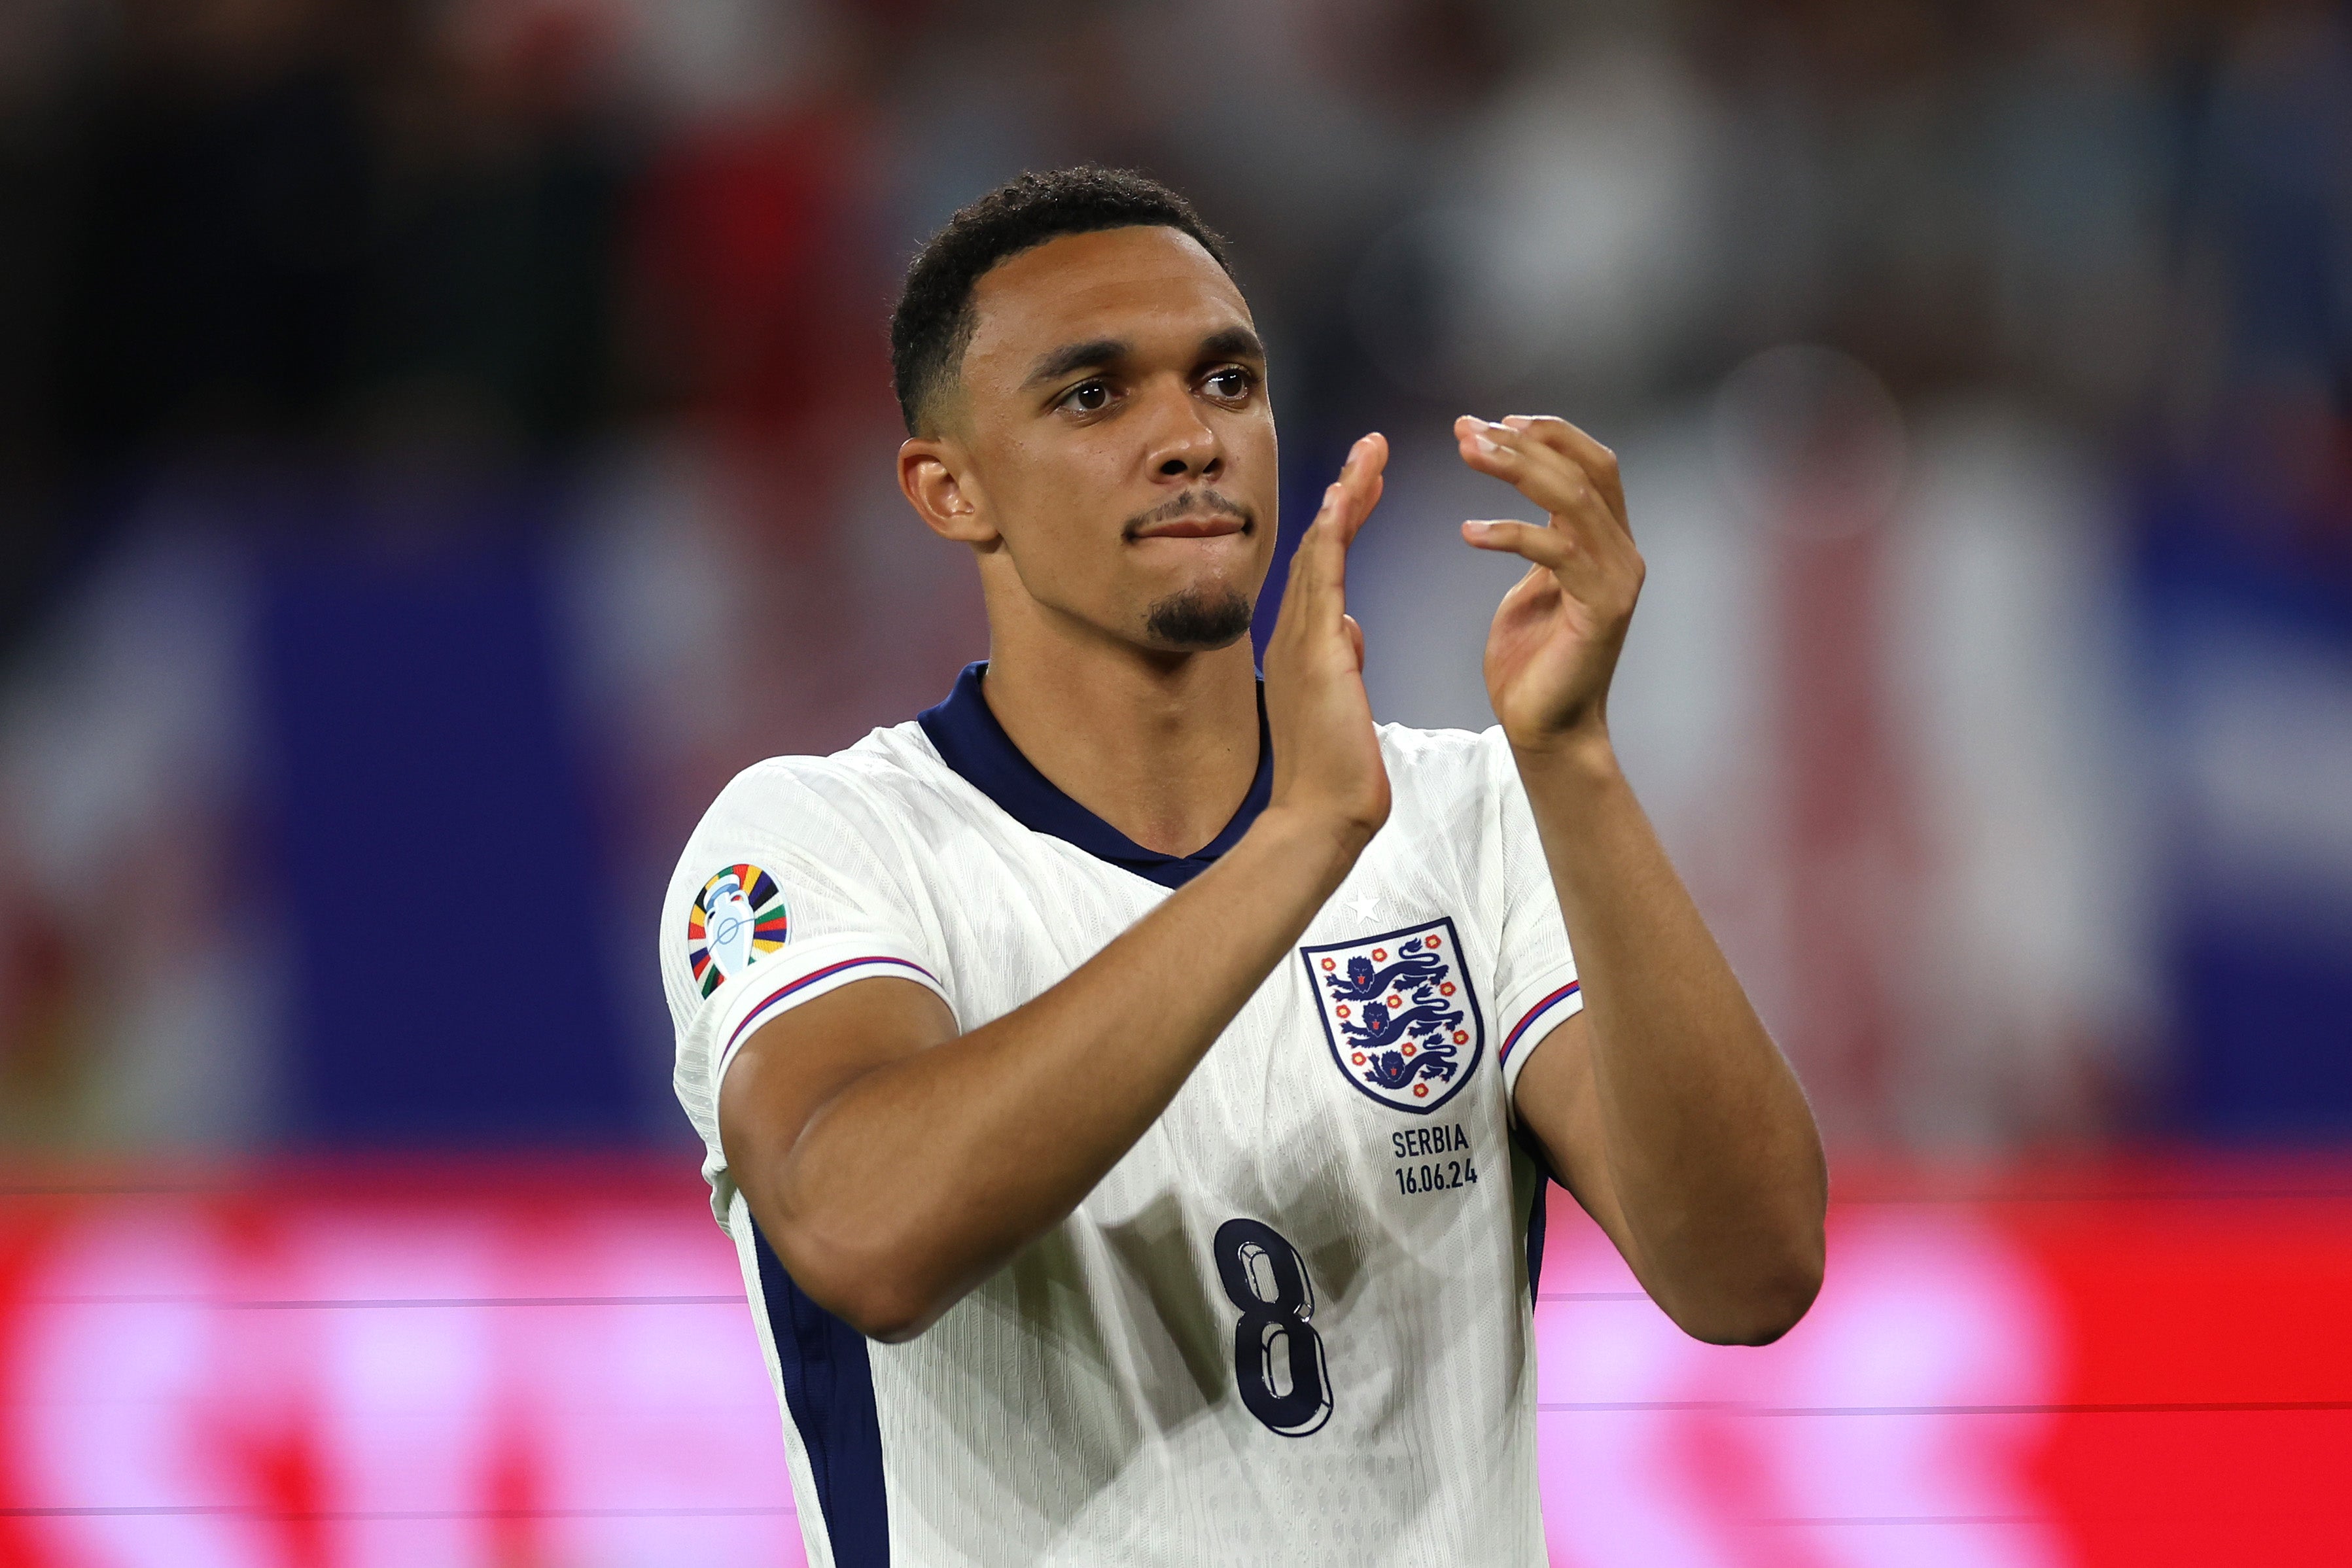 Trent Alexander-Arnold received mixed reviews for his performance in midfield against Serbia